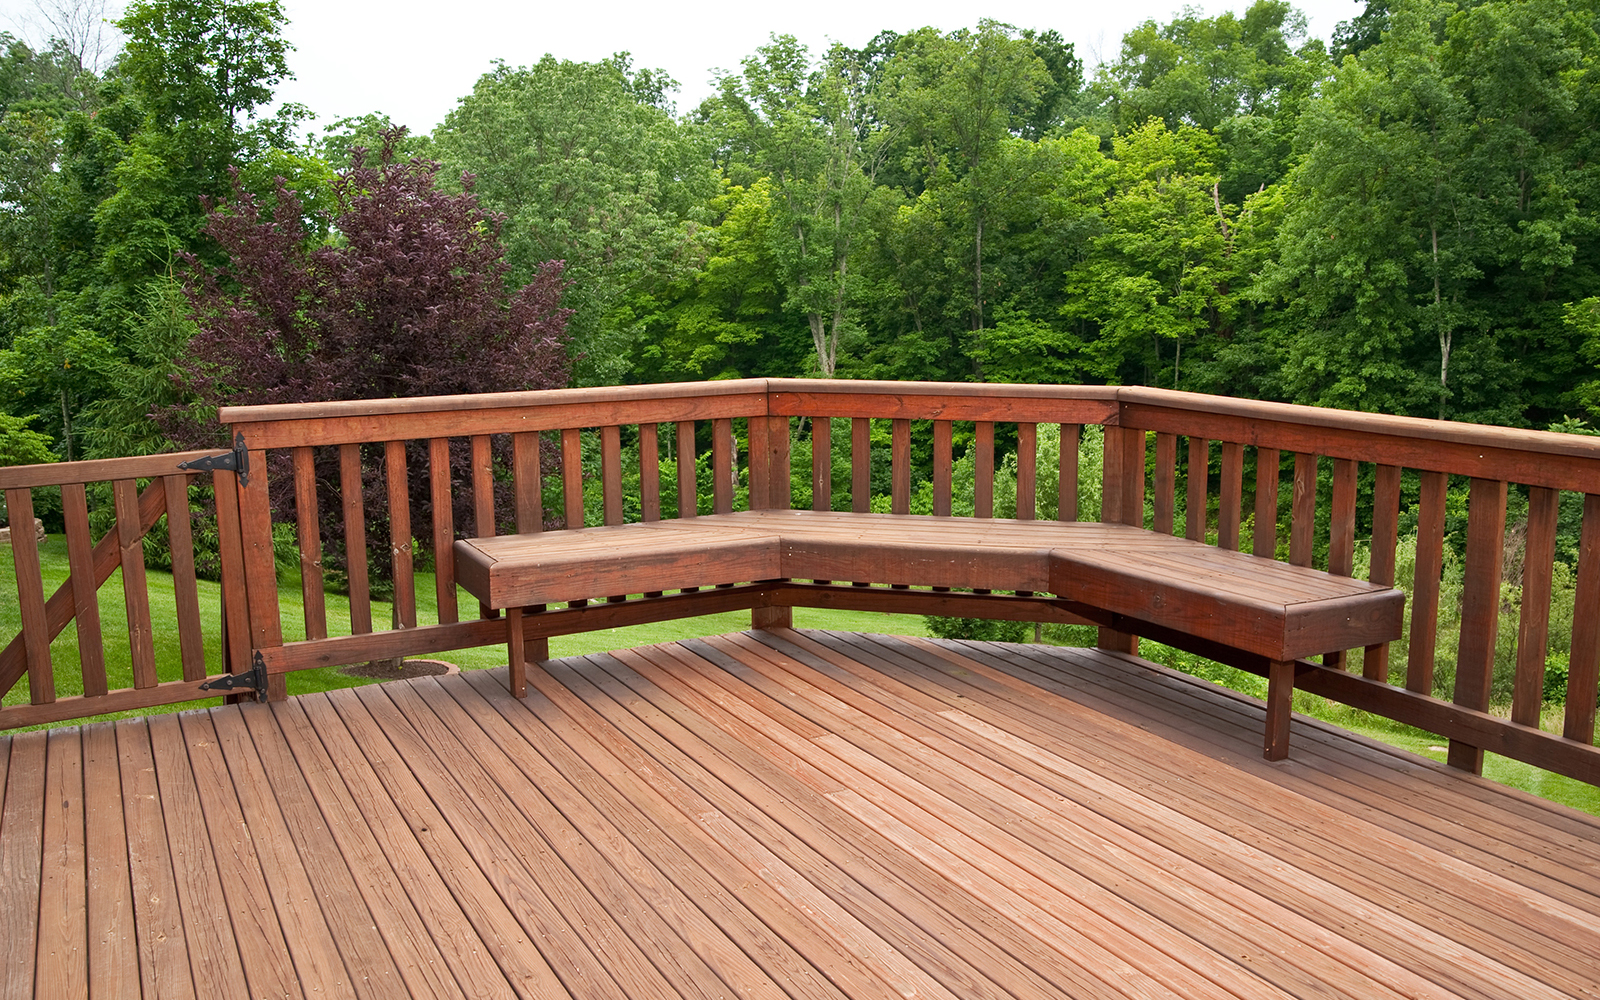 Fencing and Decks